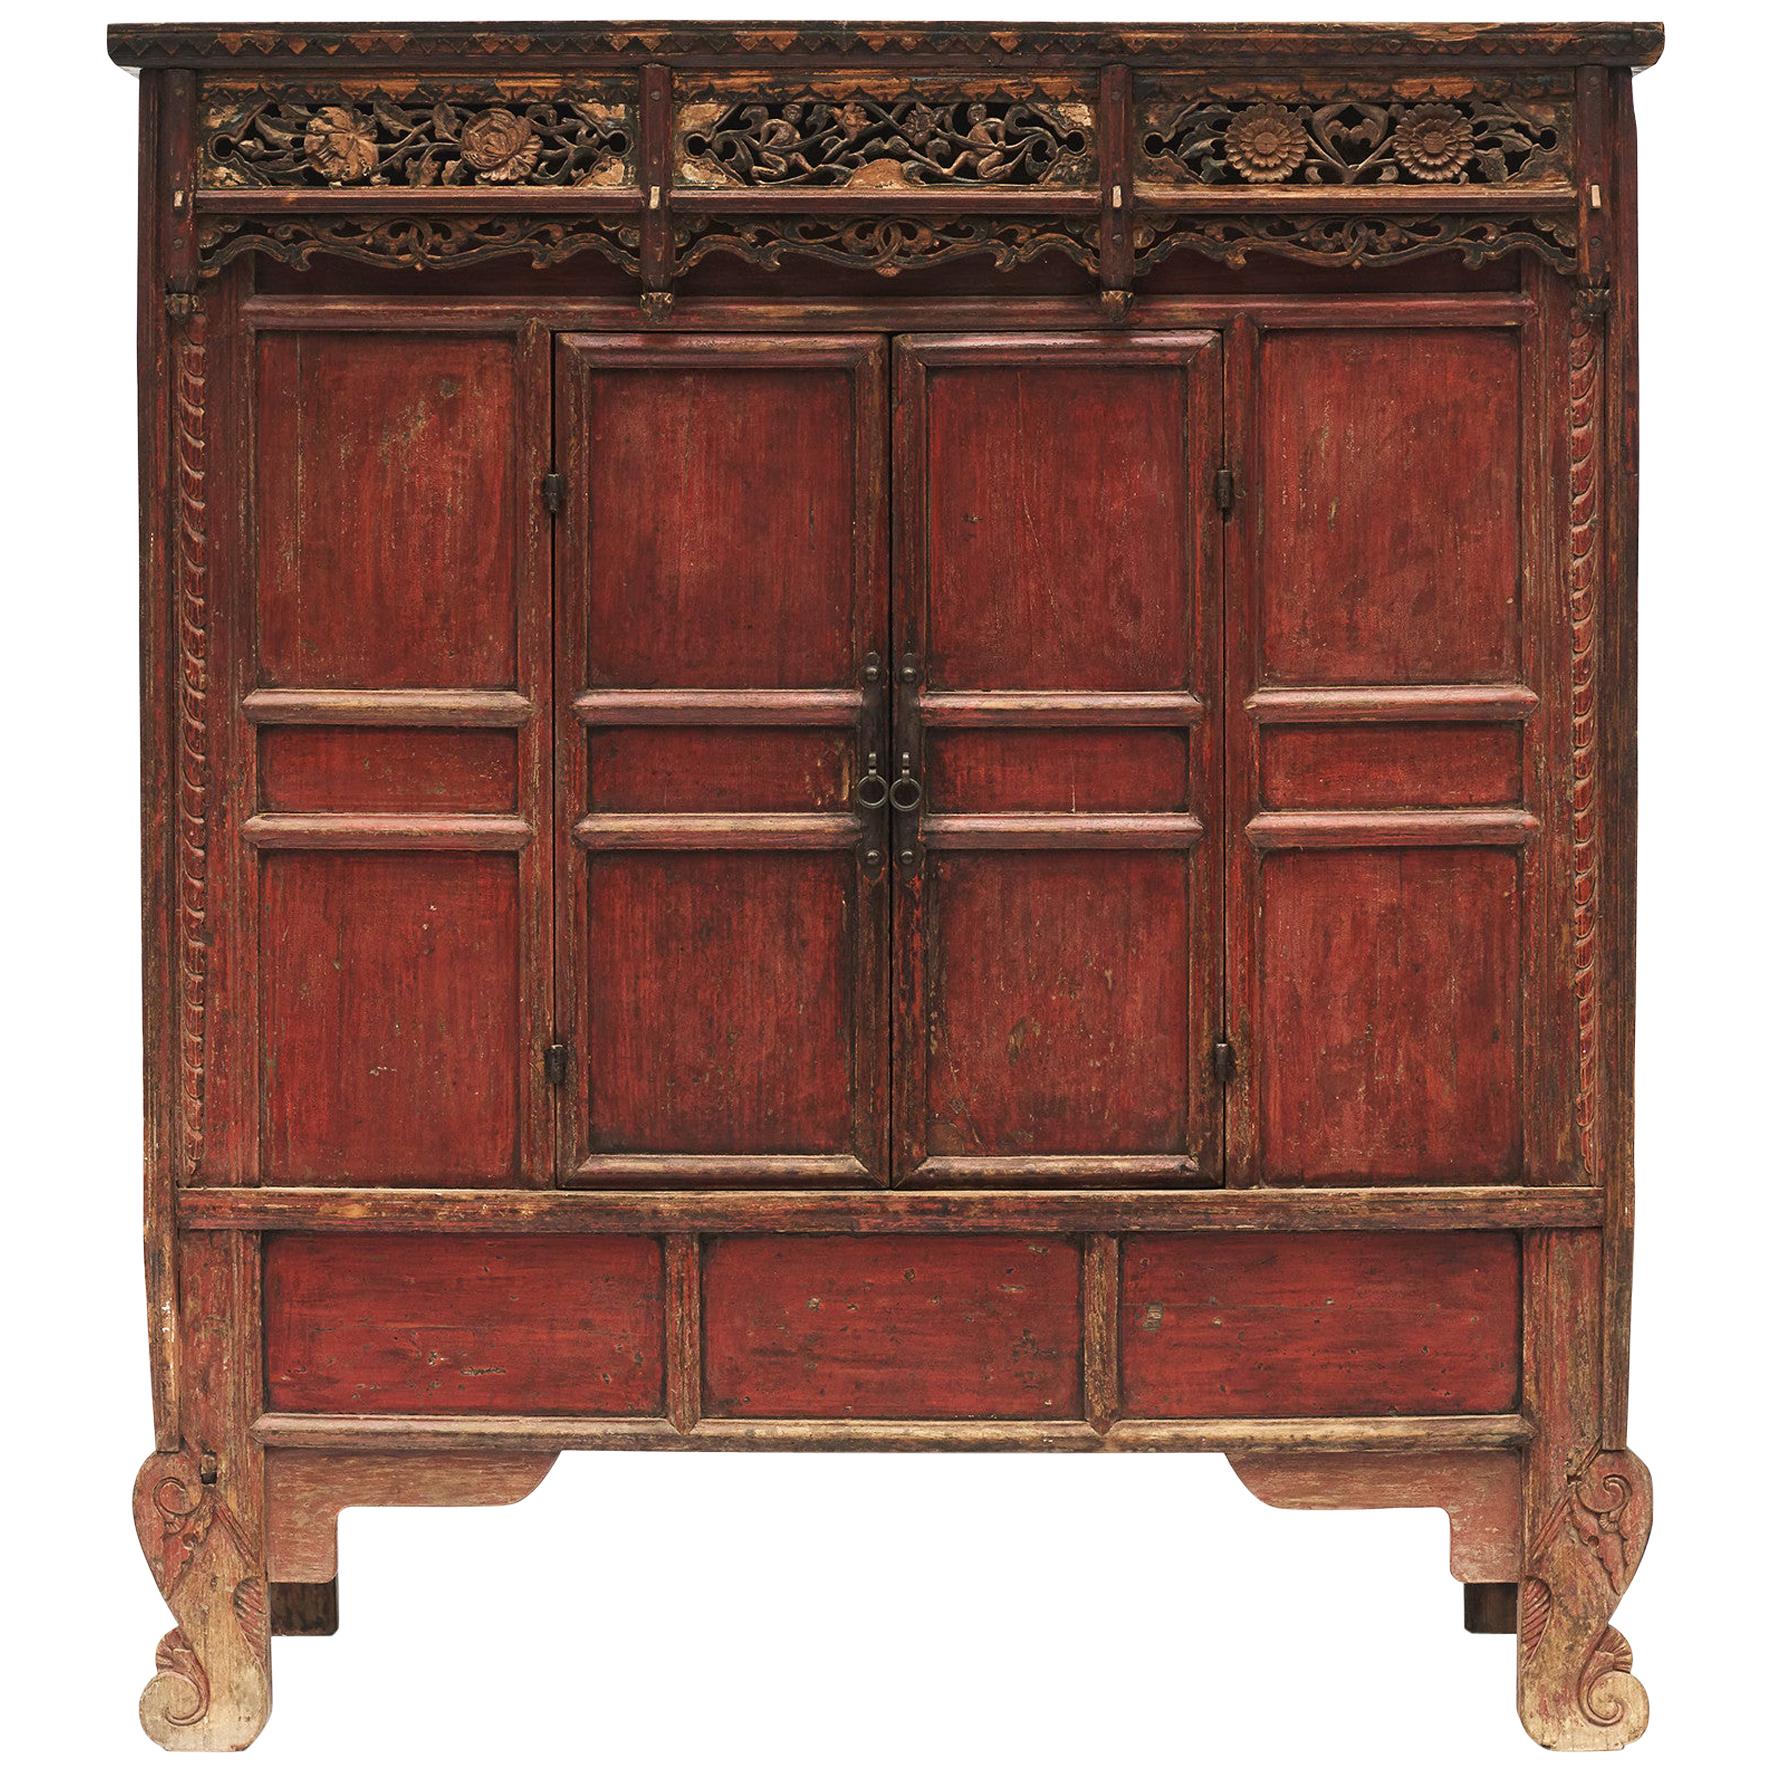 15th-16th Century Ming Dynasty Cabinet. Red Lacquer For Sale